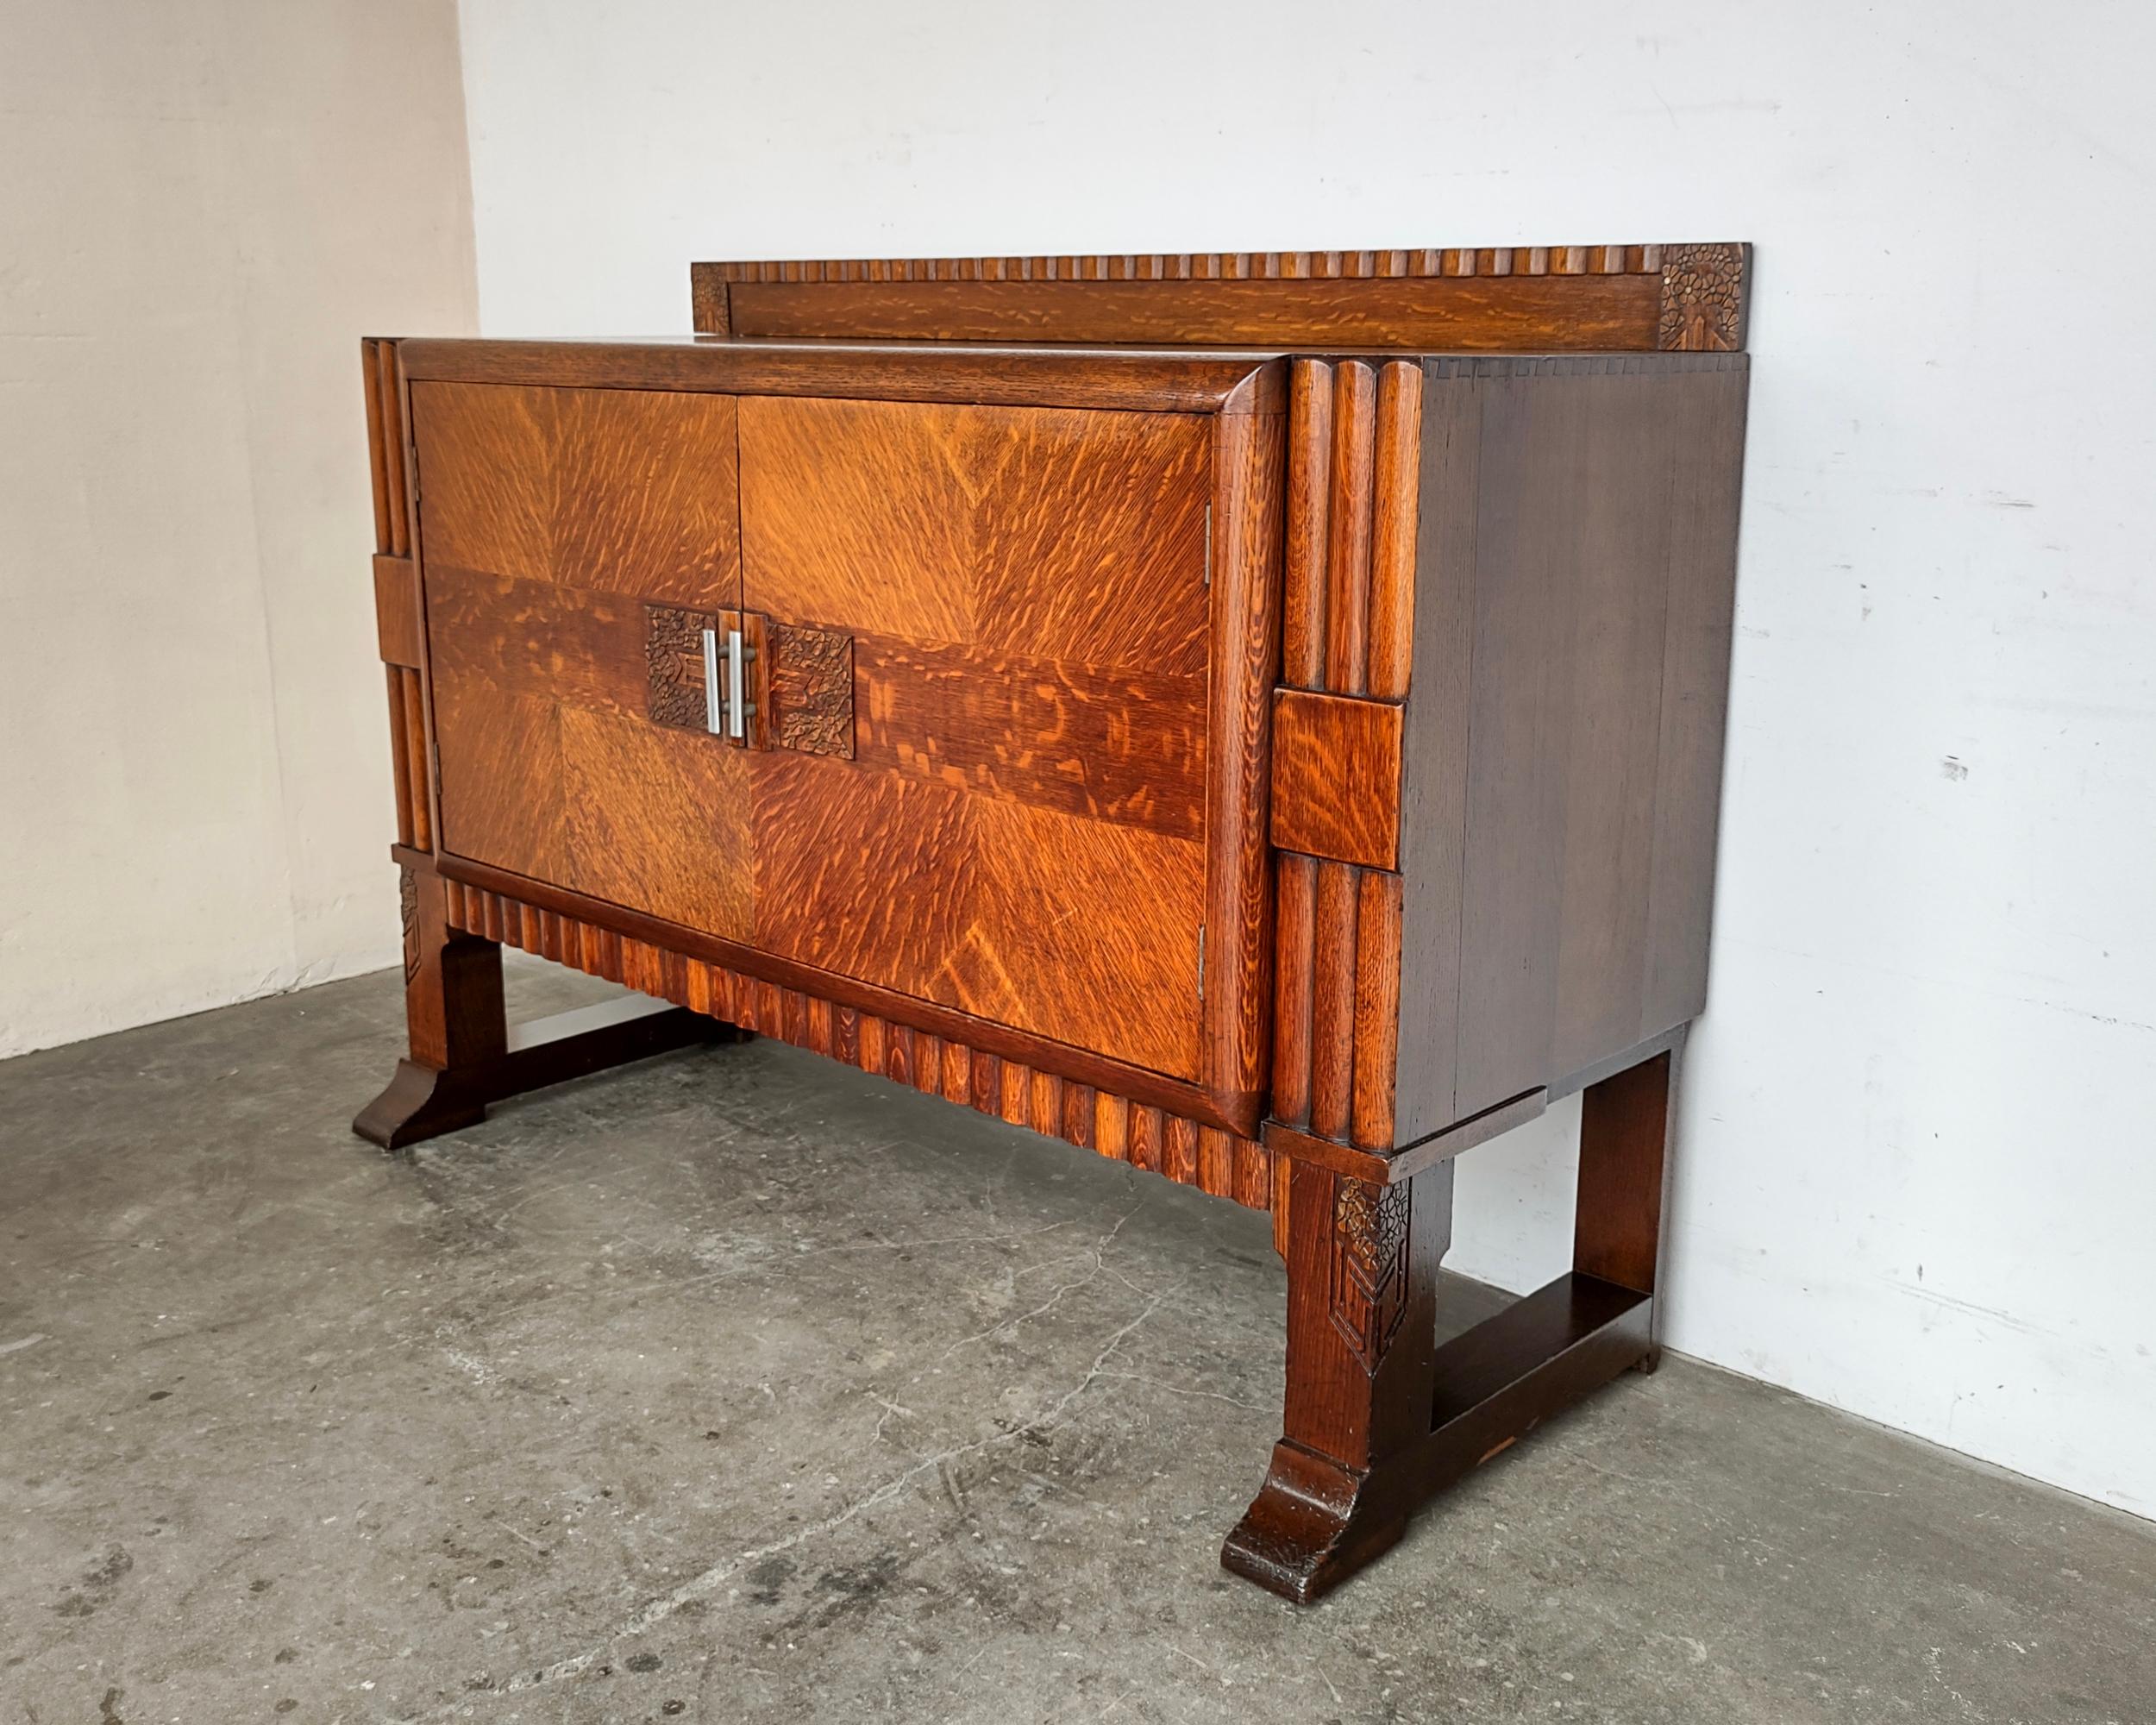 Beautiful Art Deco tiger oak cabinet. Book matched door with hand-carved details, scalloped designs throughout. Cabinet doors open to removeable shelves on each side and four small wooden drawers. Professionally restored. Great condition, some light